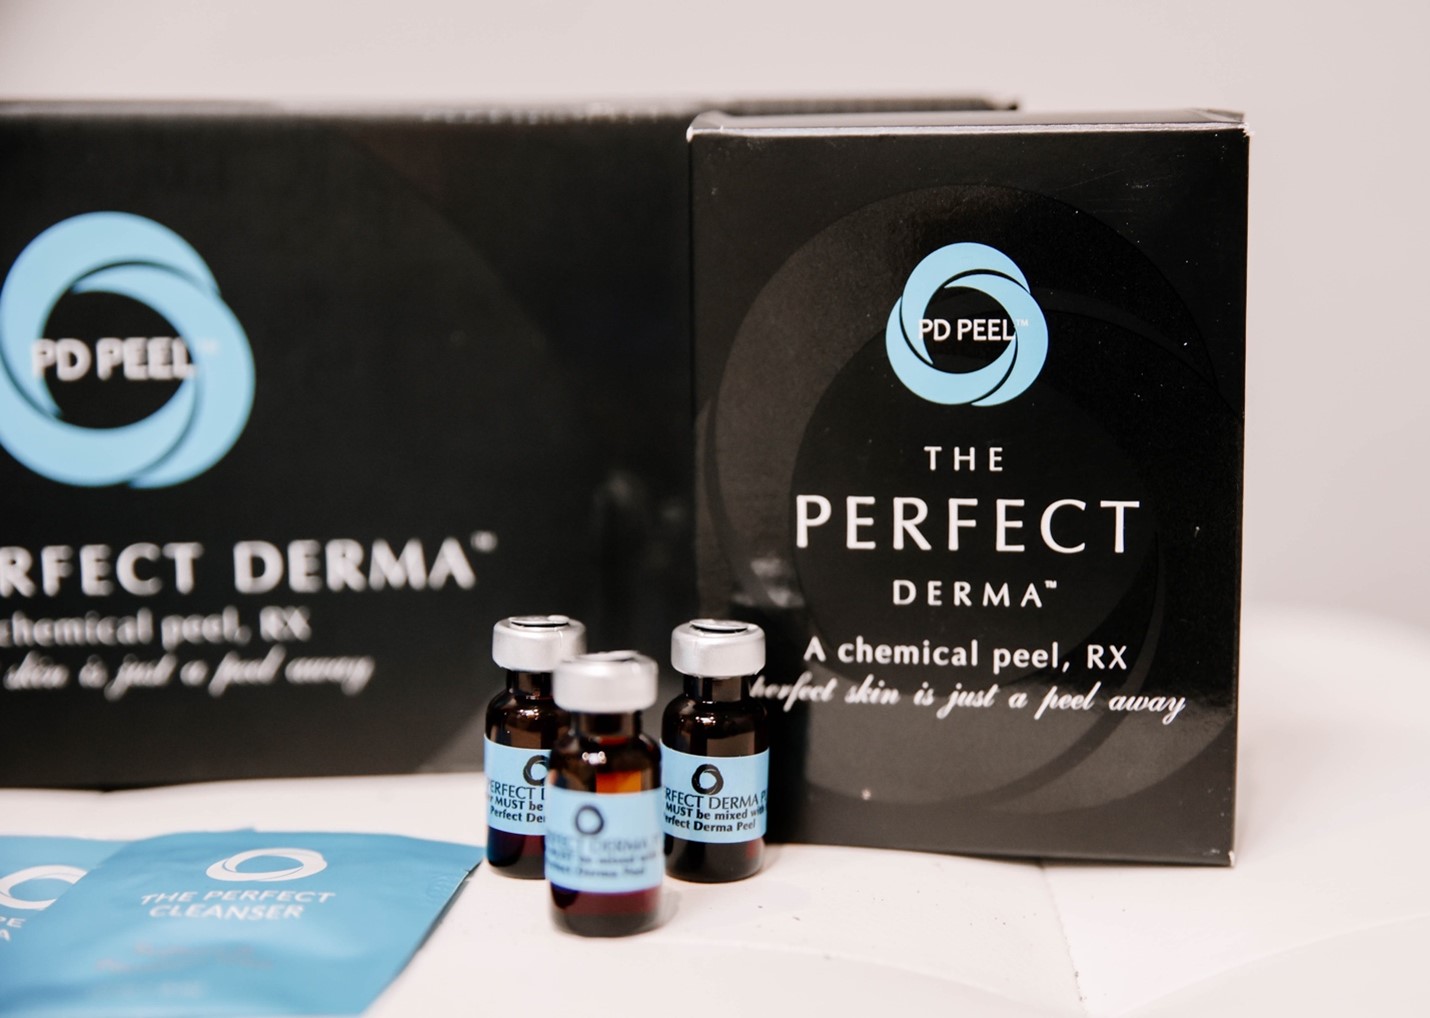 Featured image for “The Perfect Derma Peel”